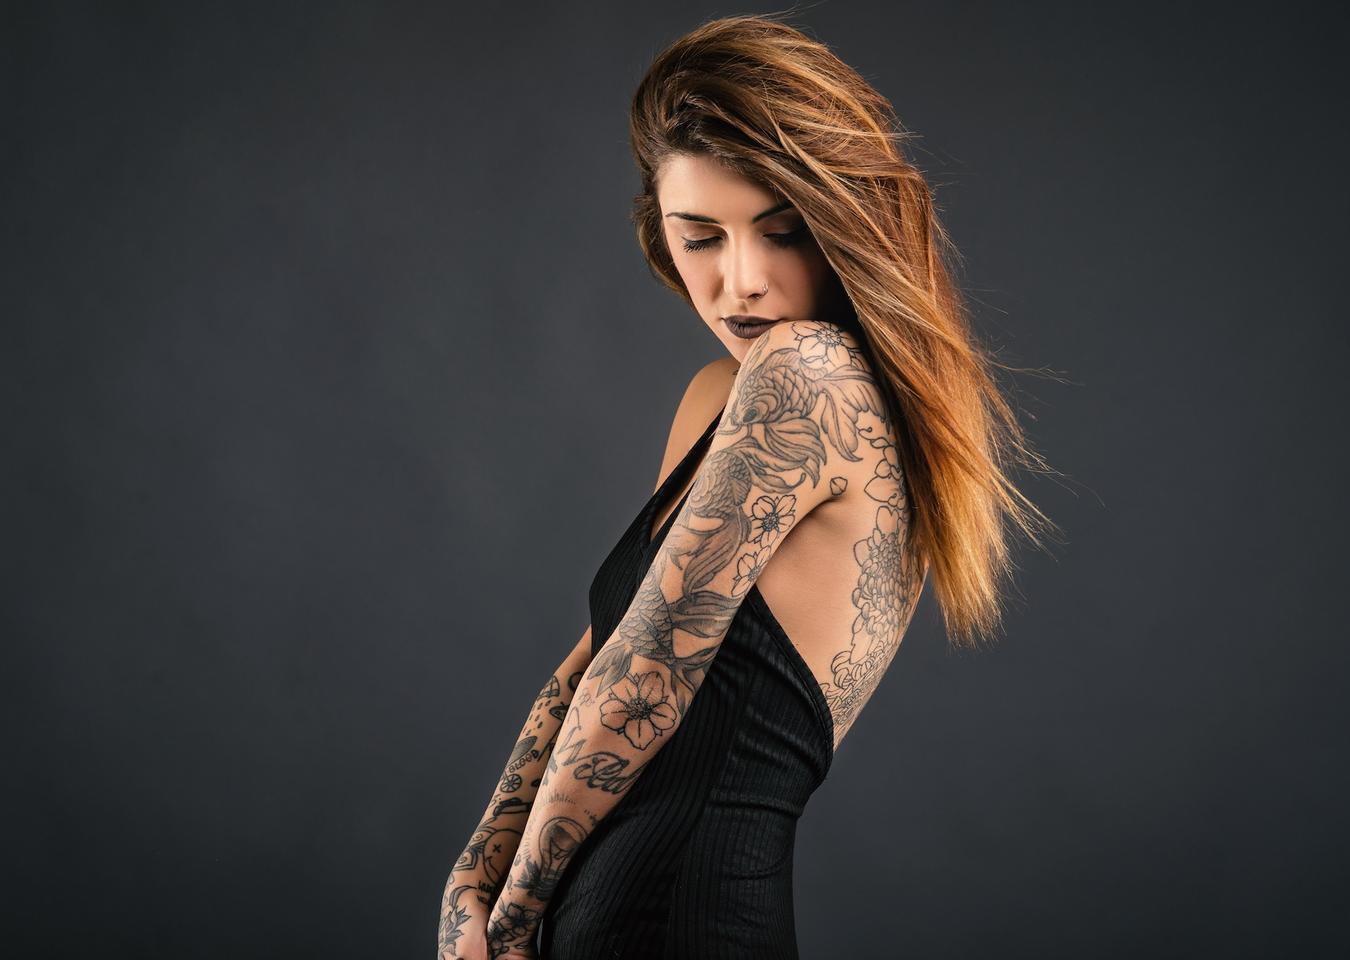 Do tattoos hurt? What it feels like, areas, pain relief, and more